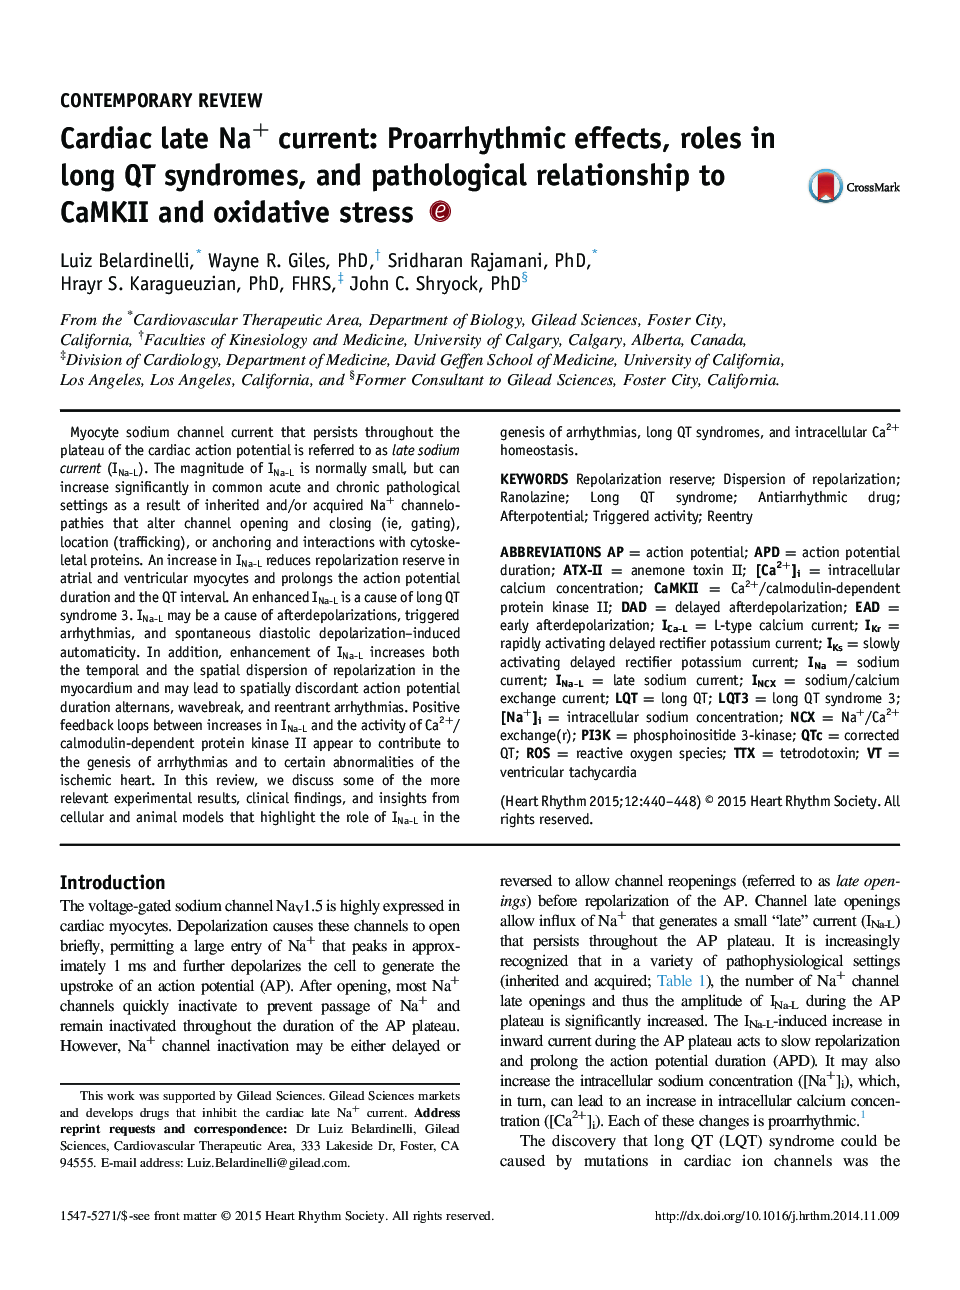 Cardiac late Na+ current: Proarrhythmic effects, roles in long QT syndromes, and pathological relationship to CaMKII and oxidative stress